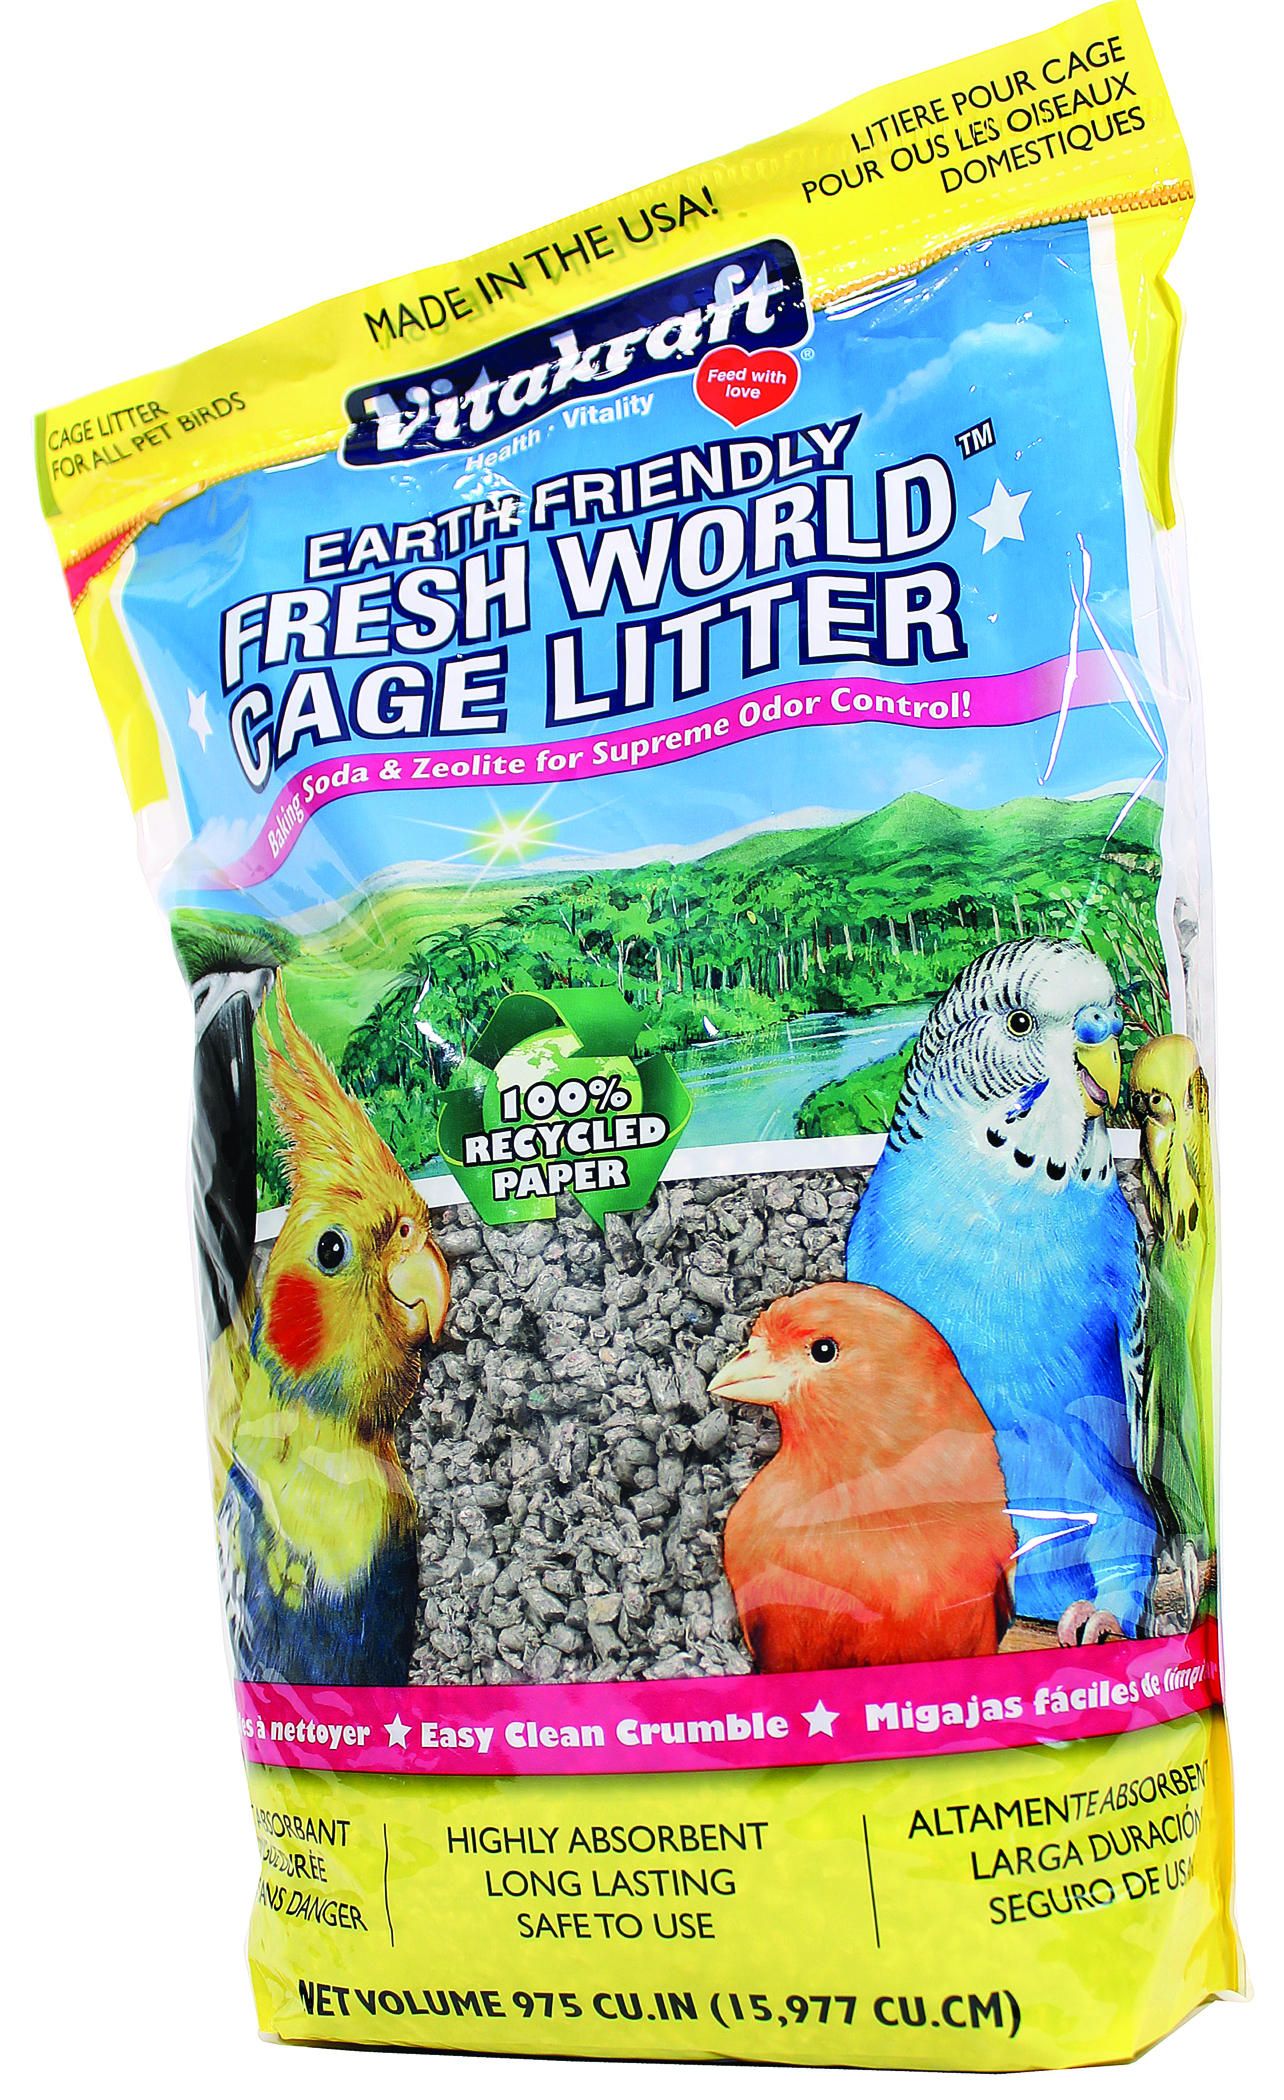 EARTH FRIENDLY FRESH WORLD CAGE LITTER FOR BIRDS